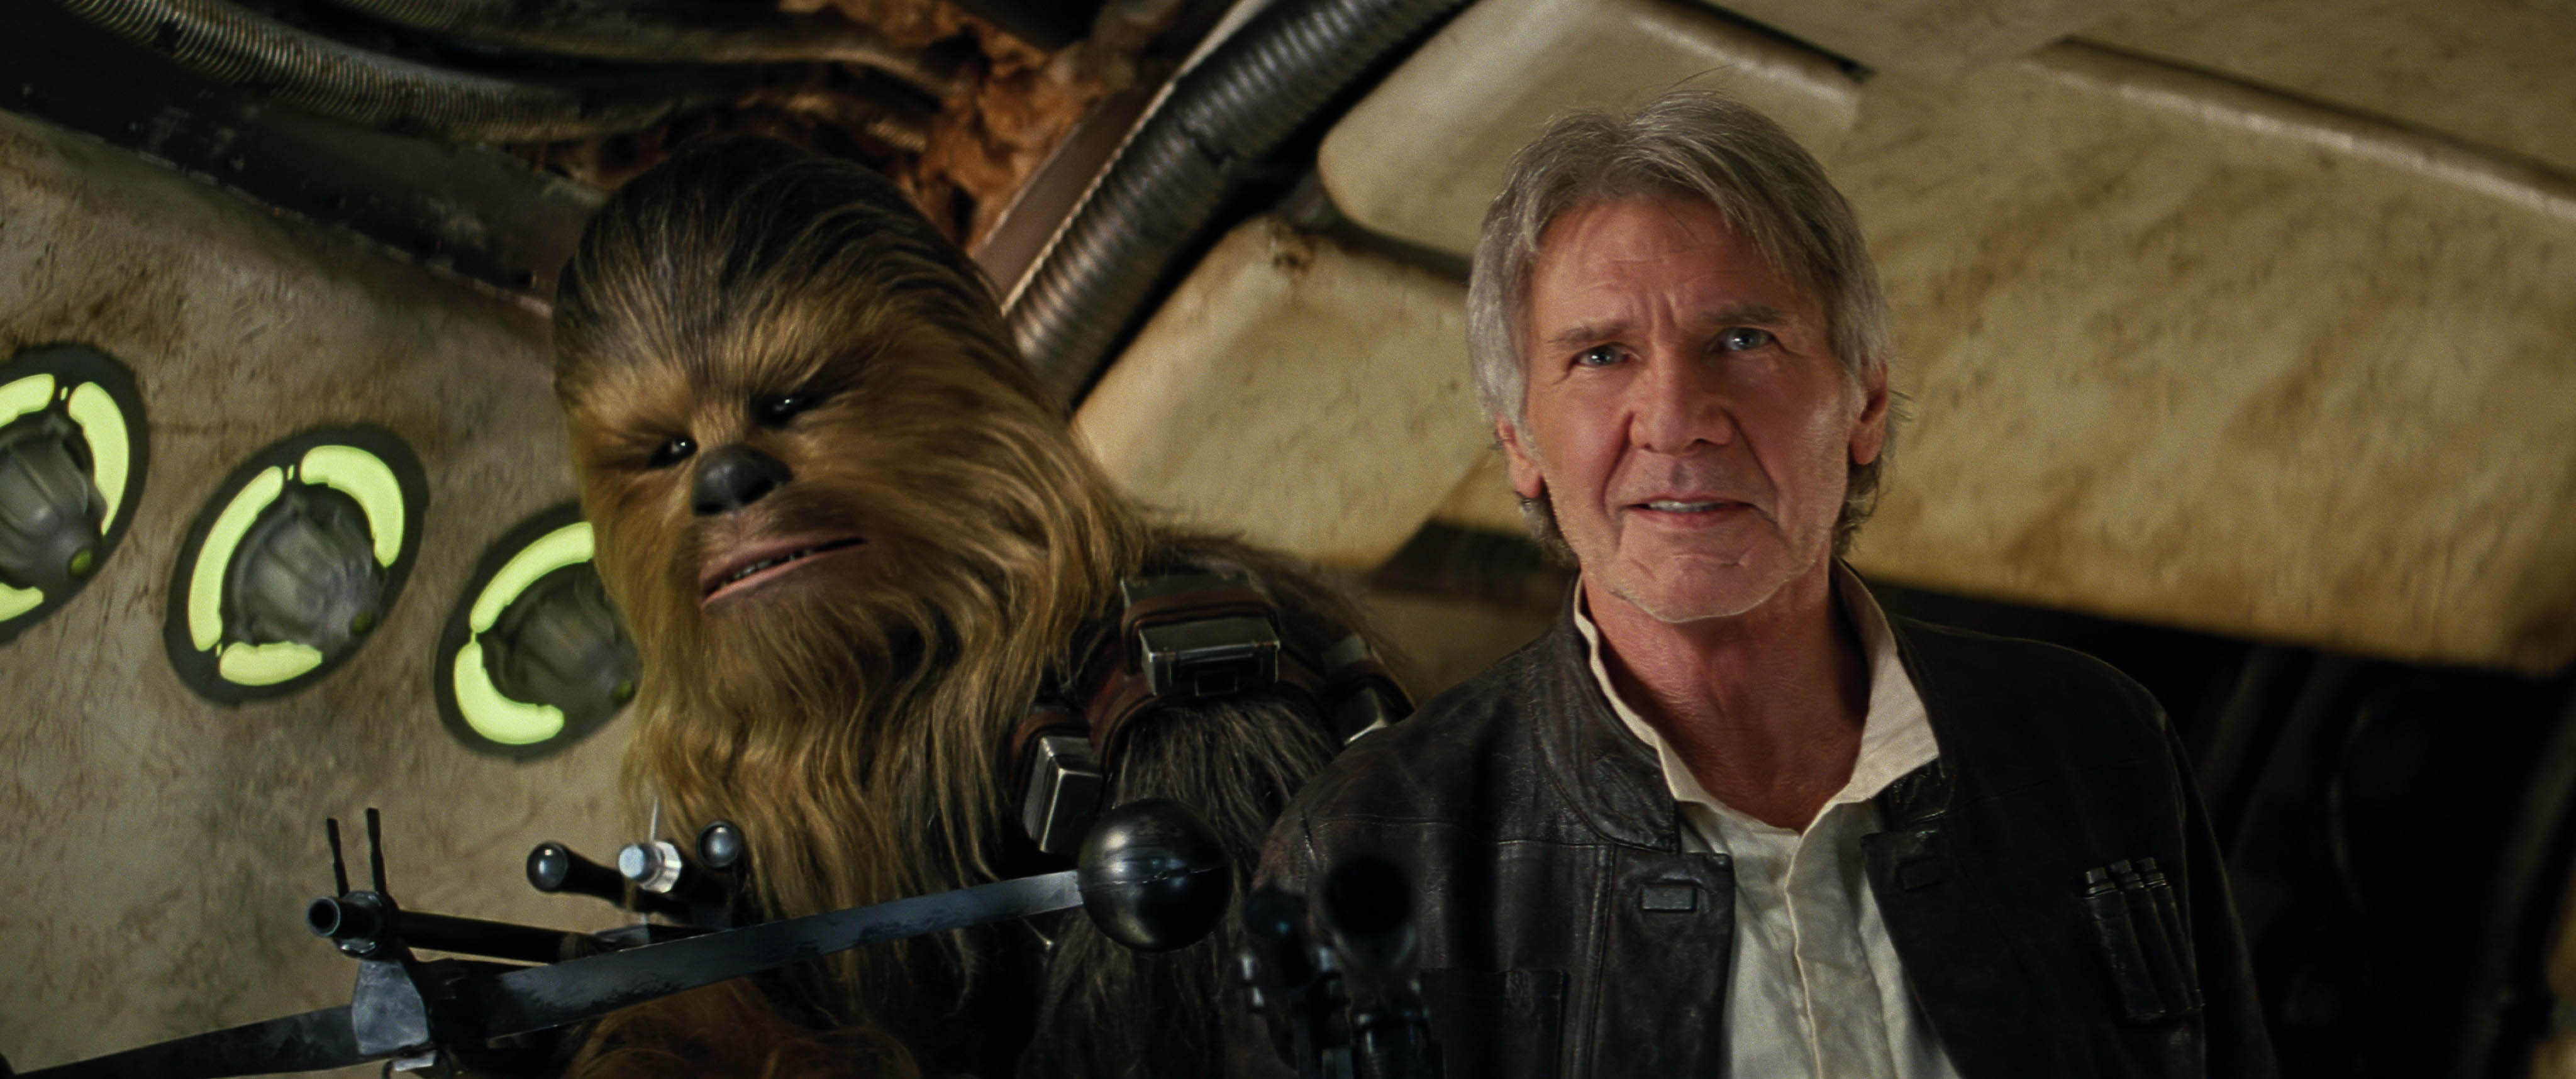 Star Wars: The Force Awakens L to R: Chewbacca (Peter Mayhew) and Han Solo (Harrison Ford) Ph: Film Frame ©Lucasfilm 2015